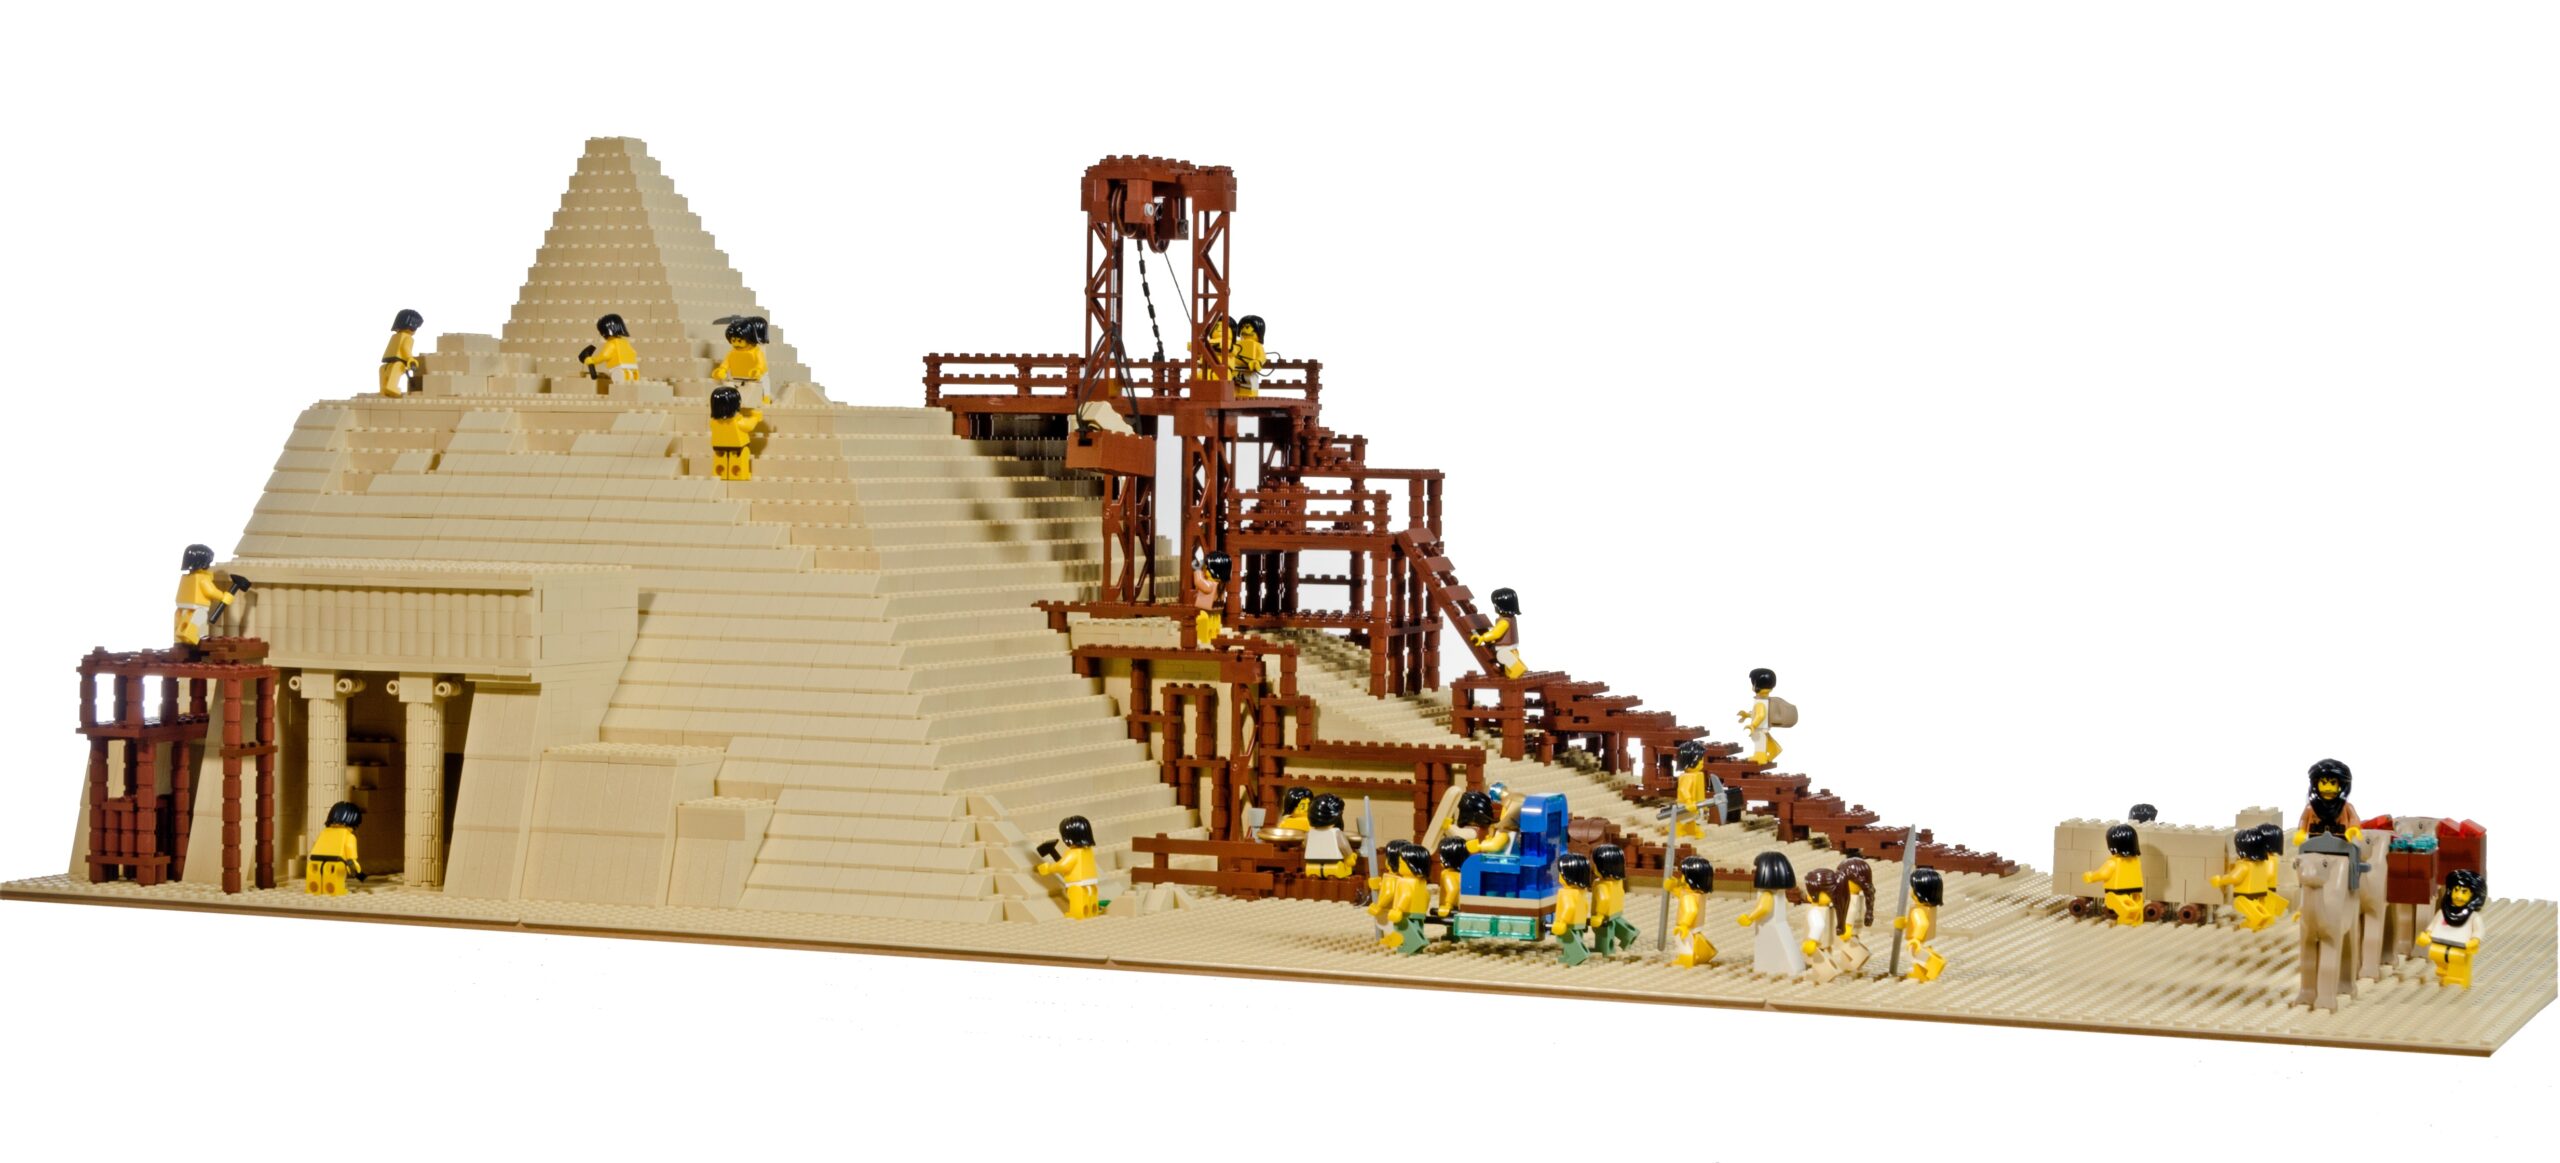 The Great Pyramid at Giza features in the Brick Wonders exhibition at The Atkinson in Southport 